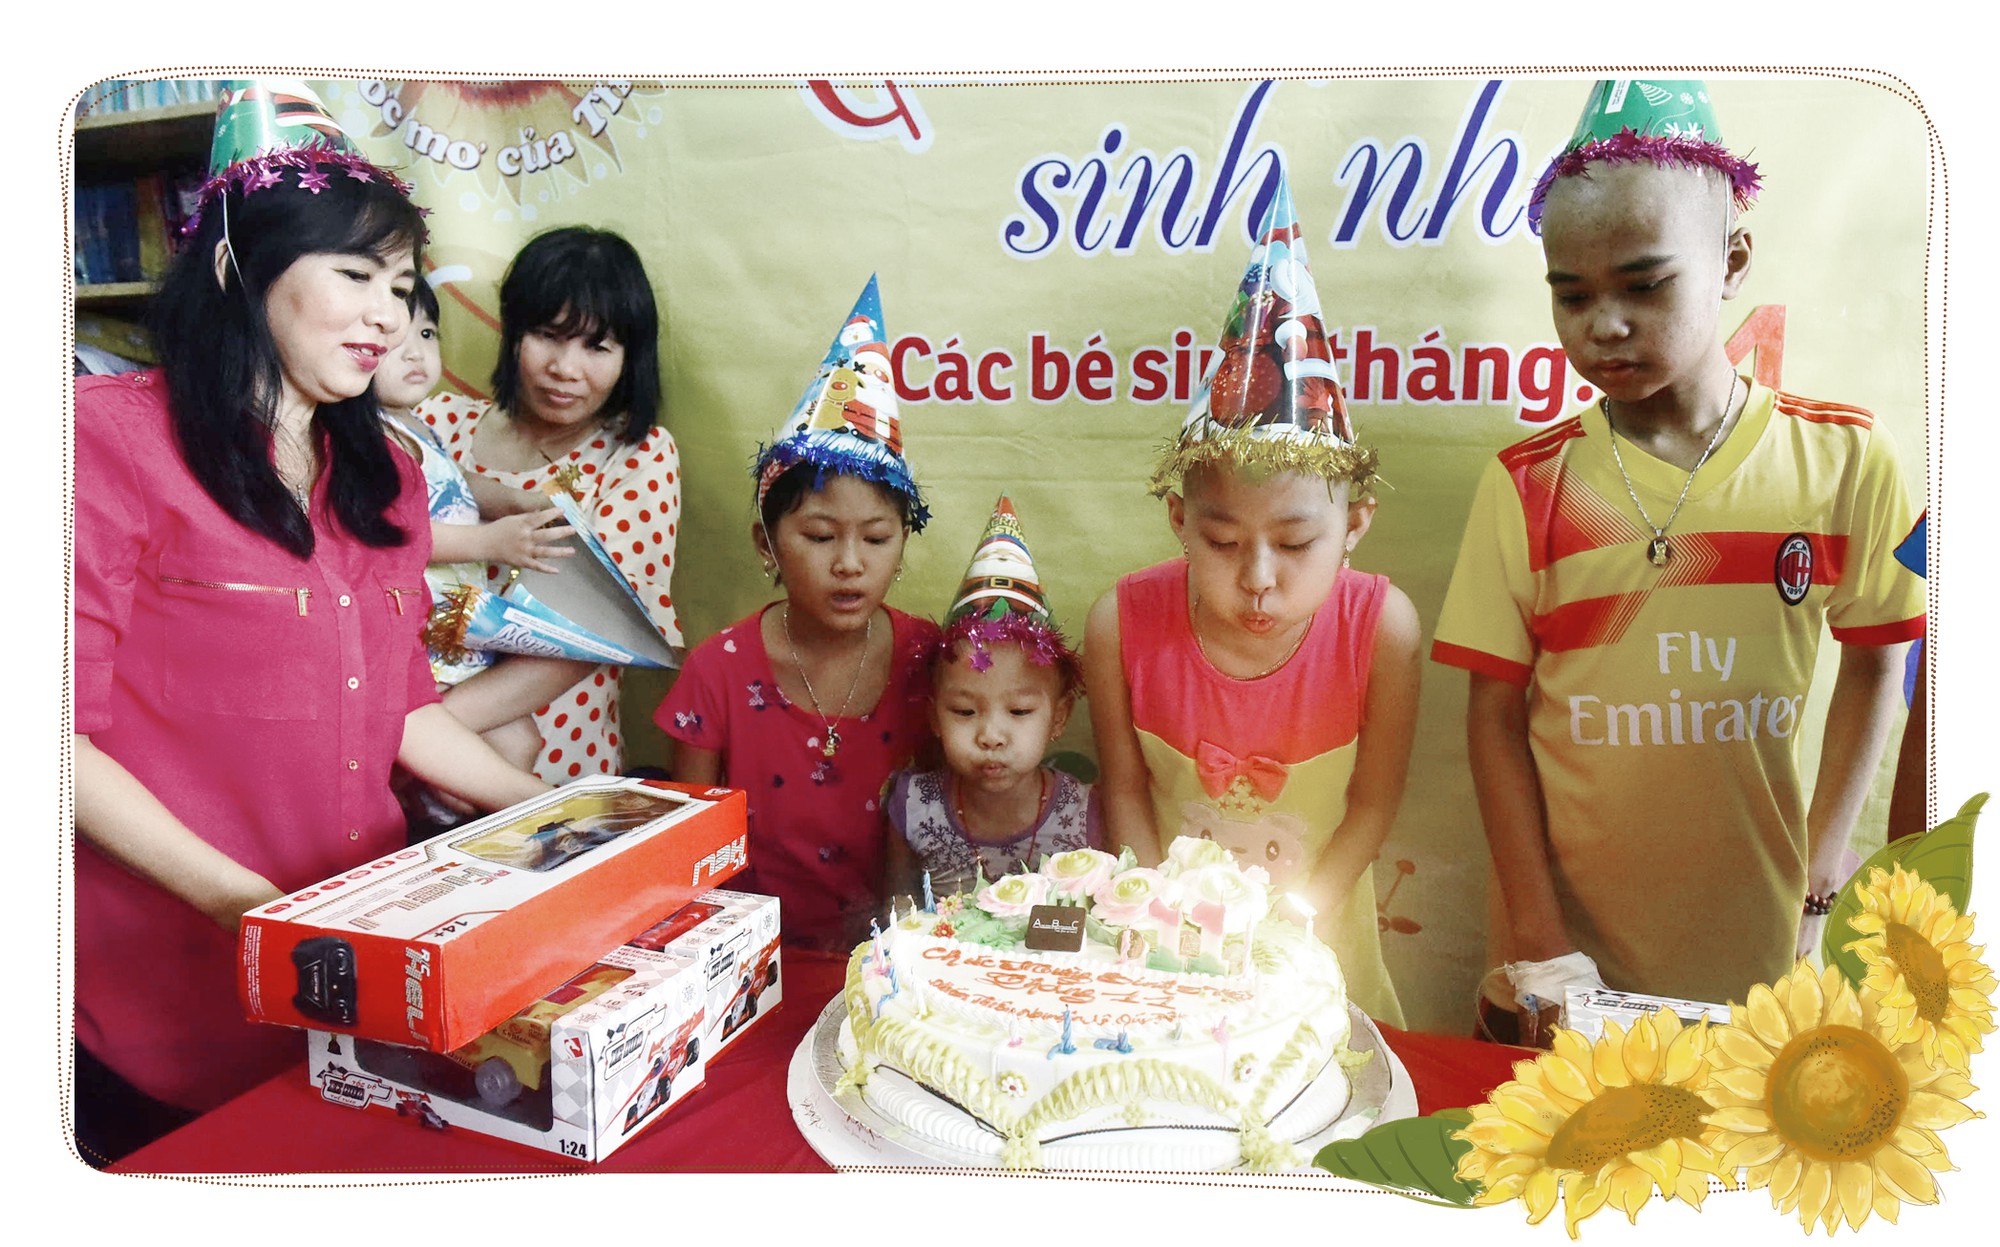 Meet those caring wholeheartedly for cancer-stricken children in Ho Chi Minh City